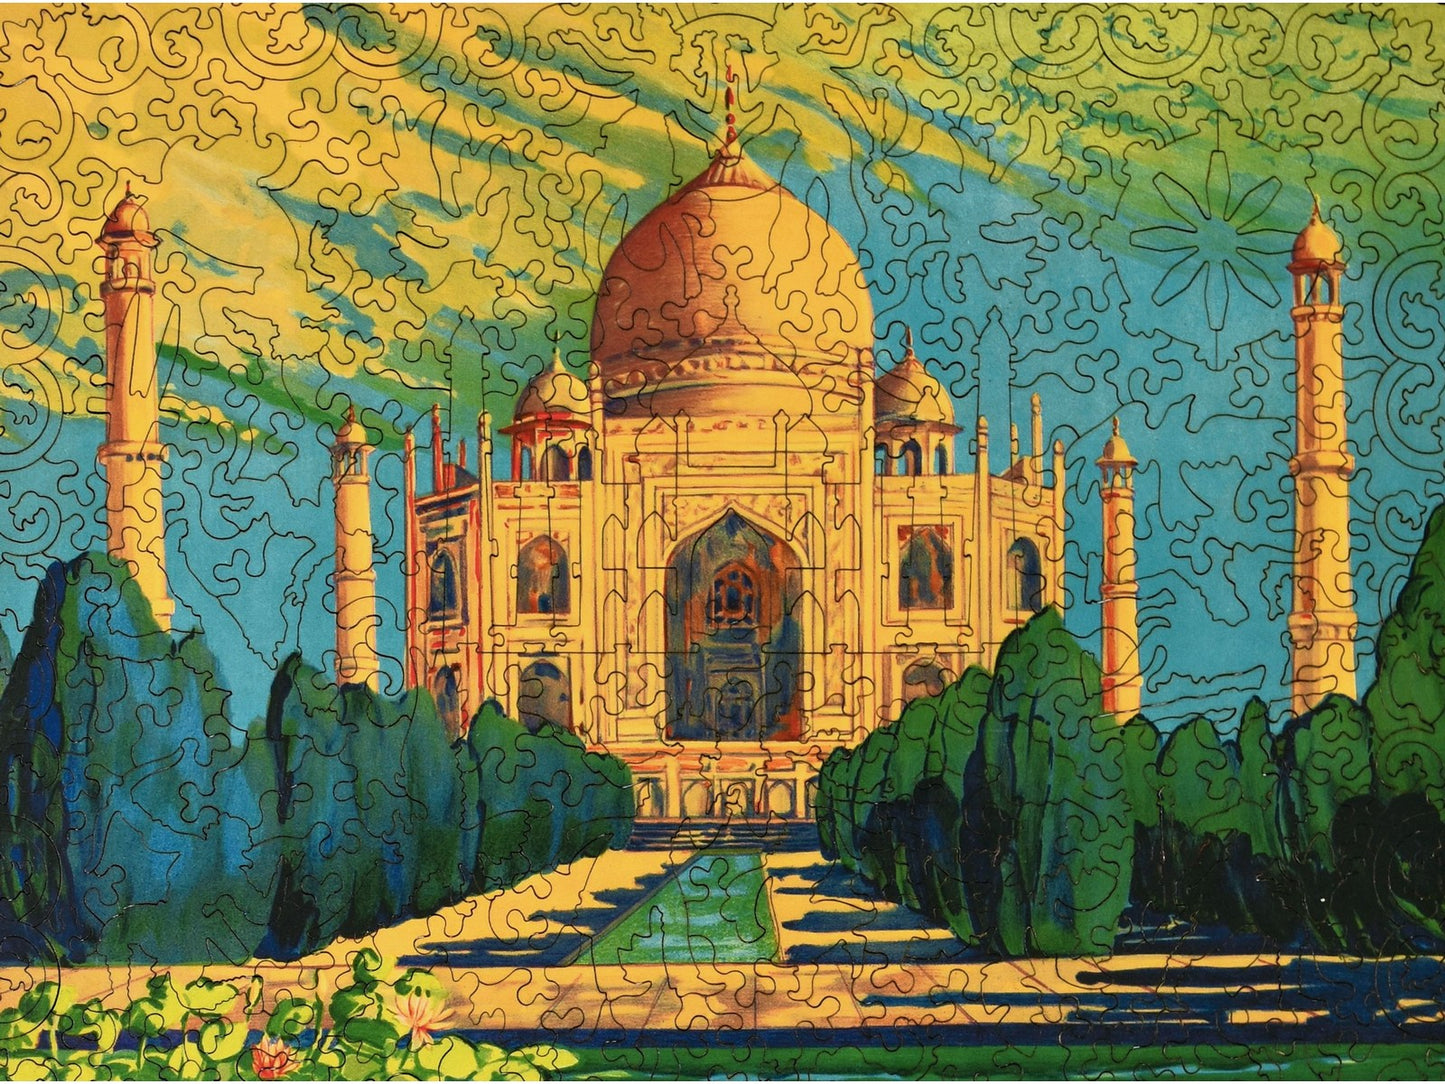 A closeup of the front of the puzzle, Agra, showing the detail in the pieces.